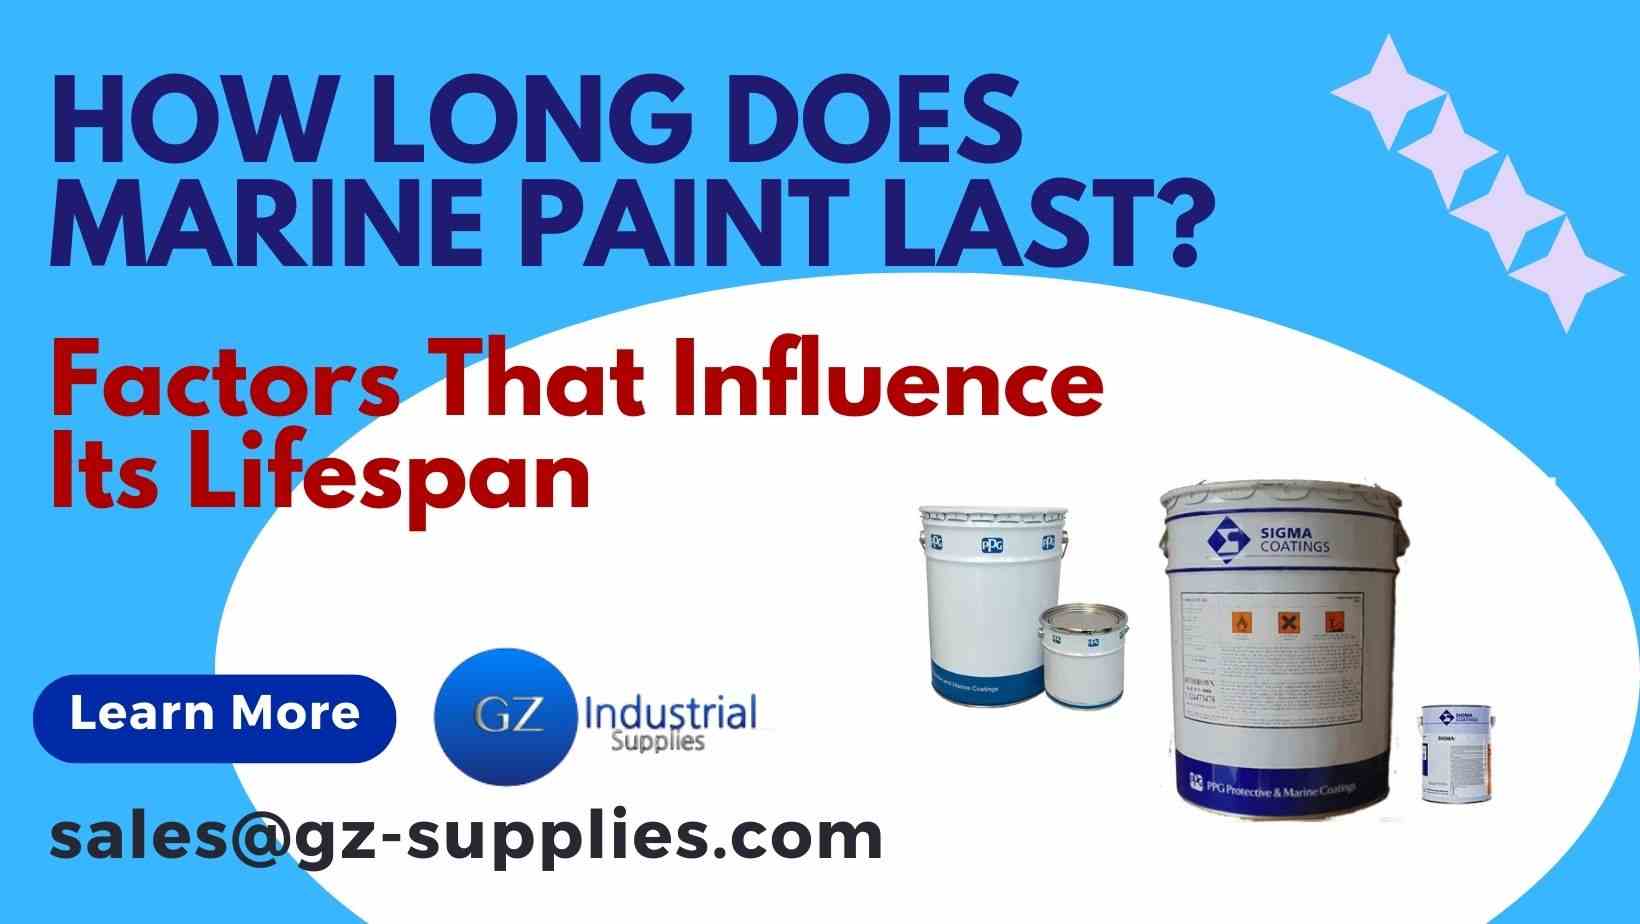 Finding the Best Waterproof Paint for Cement Surfaces - GZ Industrial  Supplies